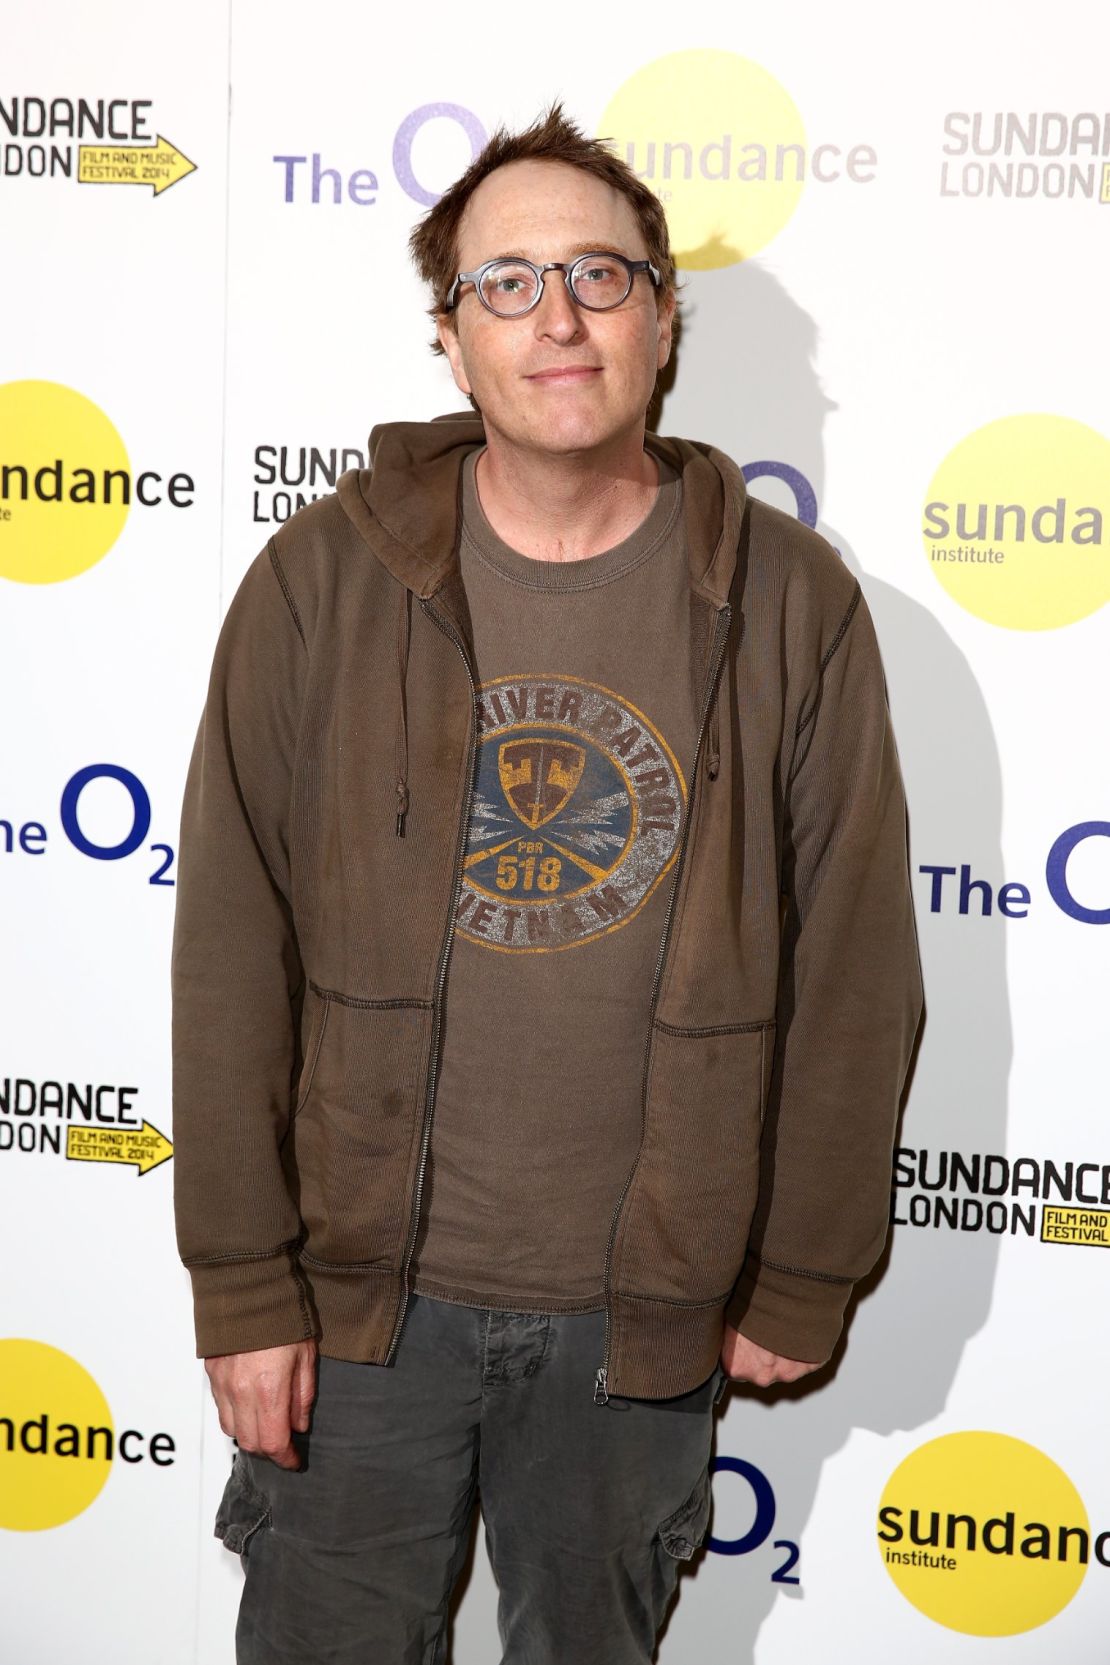 Jon Ronson is the author of "So You've Been Publicly Shamed."